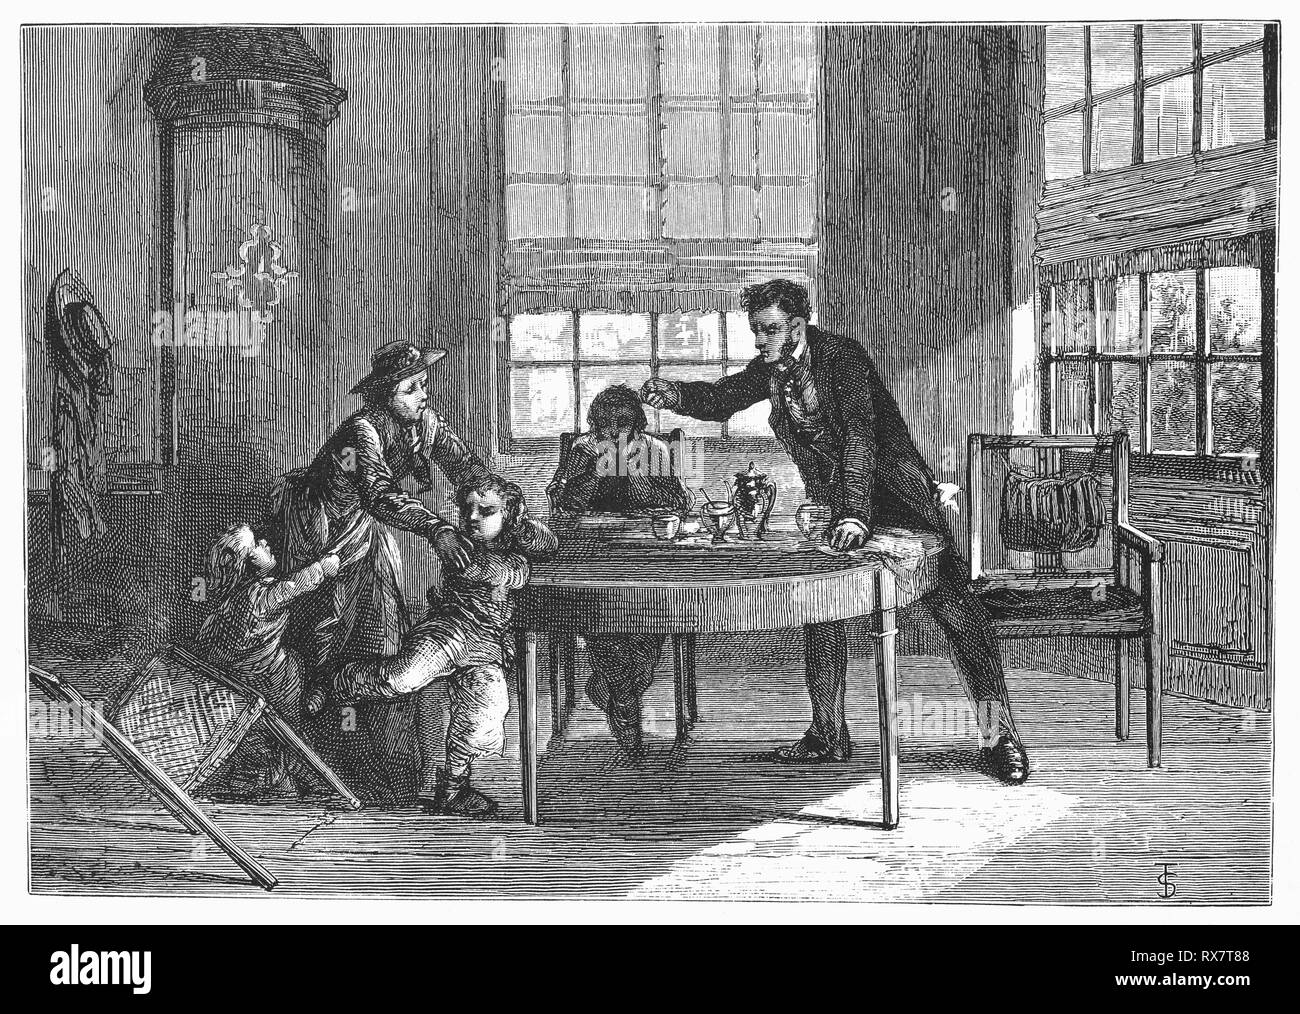 Hildebrand finds Dr Deluw threatening his screaming 6 year old son, his wife white with fear, trying to calm the boy, while a little five-year-old girl clung to her. Watching it all with amusement is a  boy of thirteen years sitting at the table with a book in front of him.  From the Camera Obscura, a 19th Century collection of Dutch humorous-realistic essays, stories and sketches in which Hildebrand, the author, takes an ironic look at the behavior of the 'well-to-do', finding  them bourgeois and without a good word for them. Stock Photo